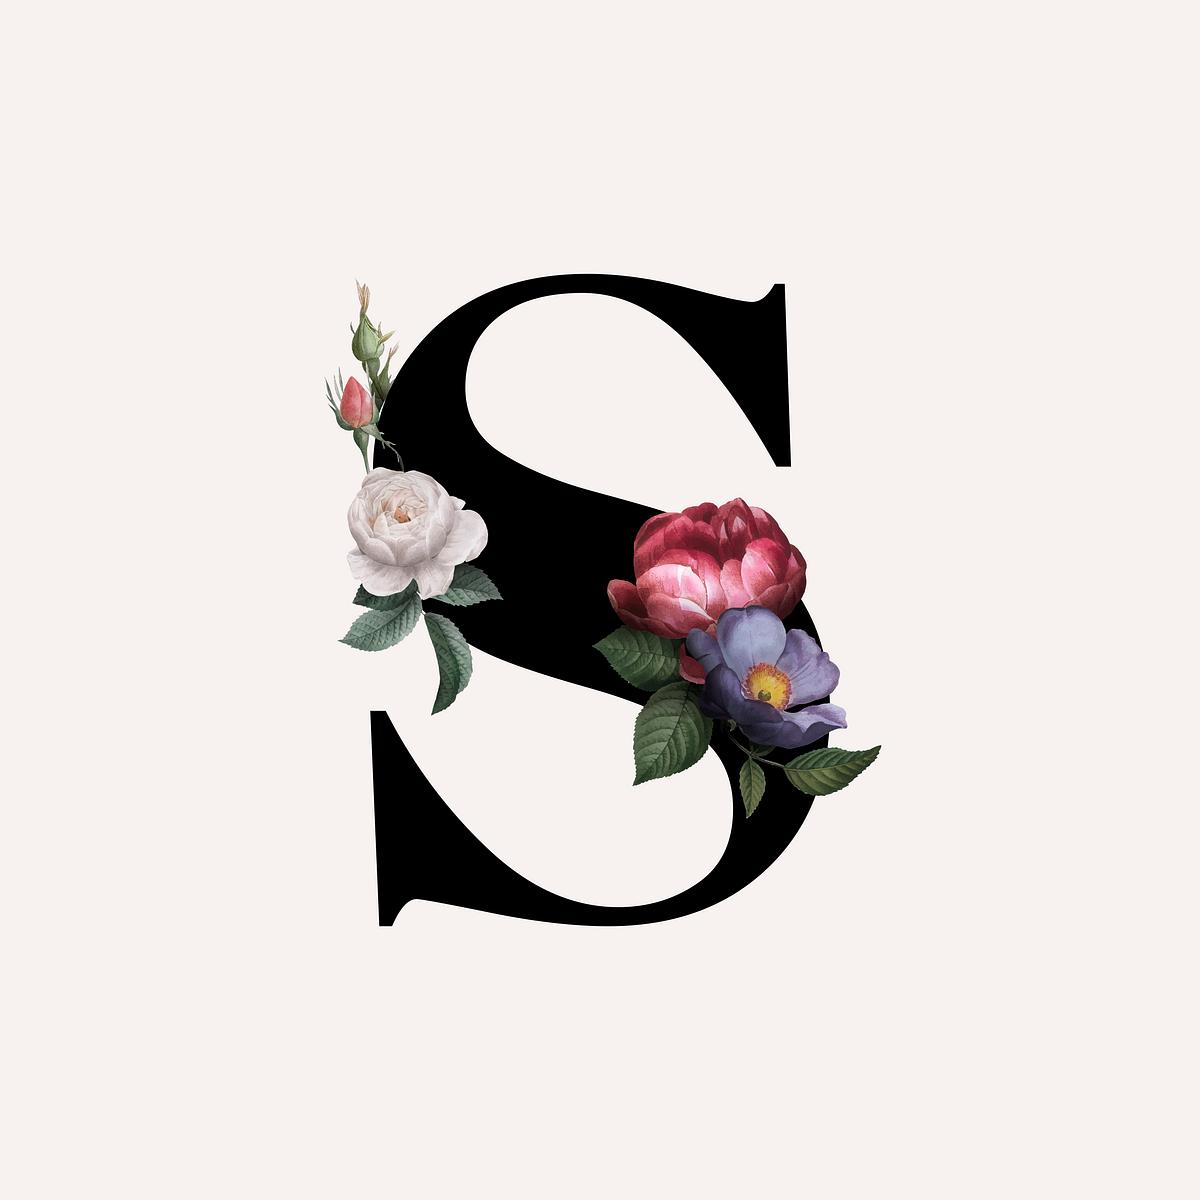 Download Floral letter S font | Free stock vector - 583158